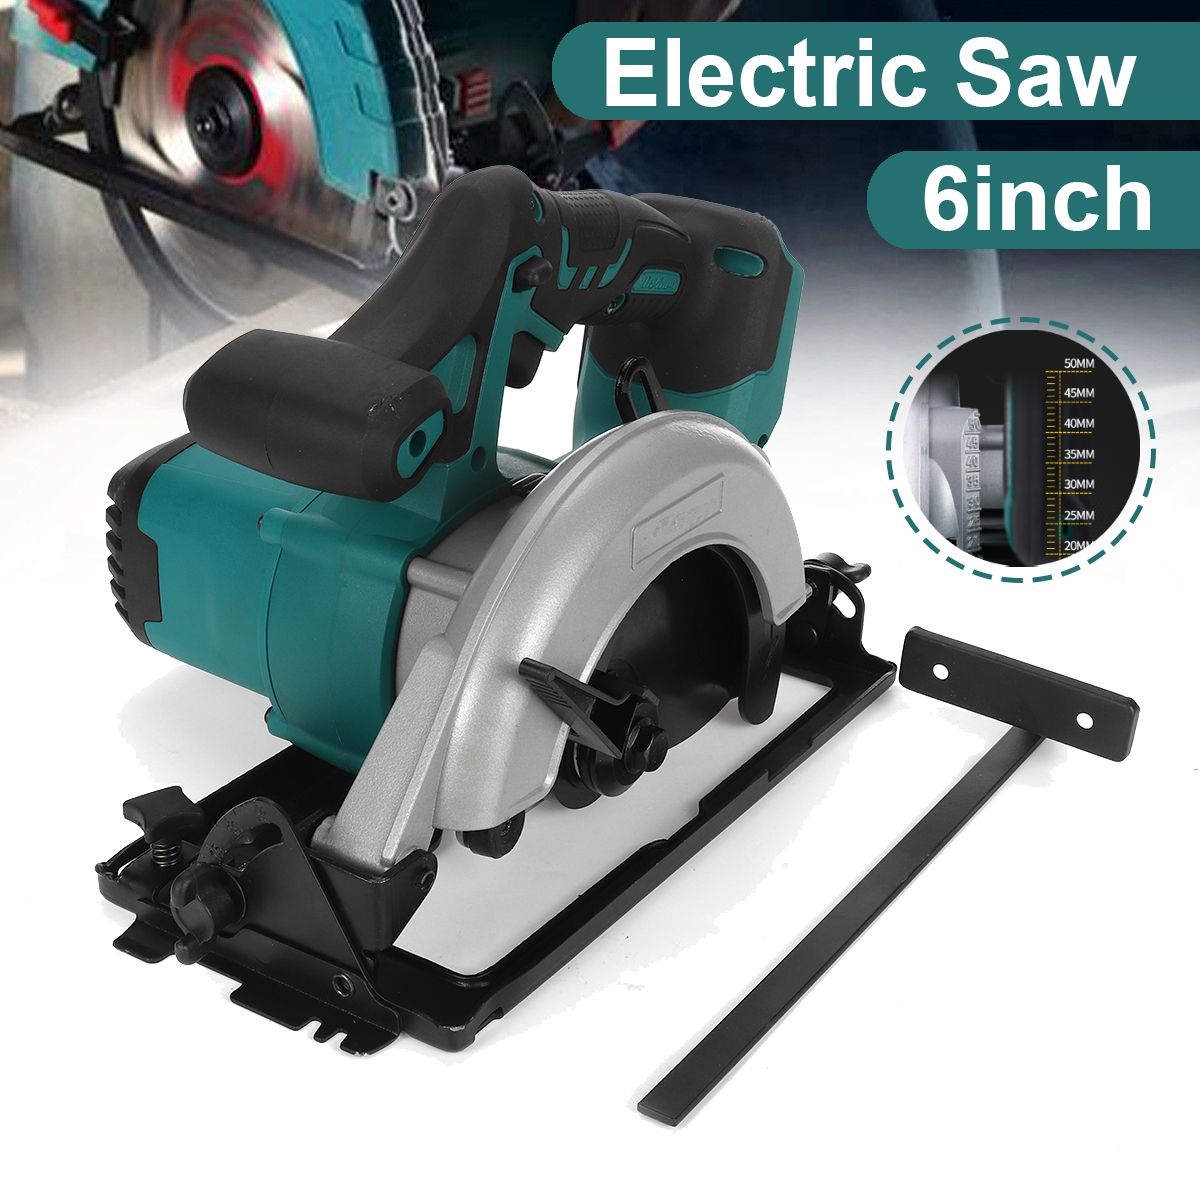 Drillpro-Electric-Circular-Saw-6Inch152mm-Power-Tools-3800RPM-Multifunction-Cutting-Machine-For-Maki-1744309-1